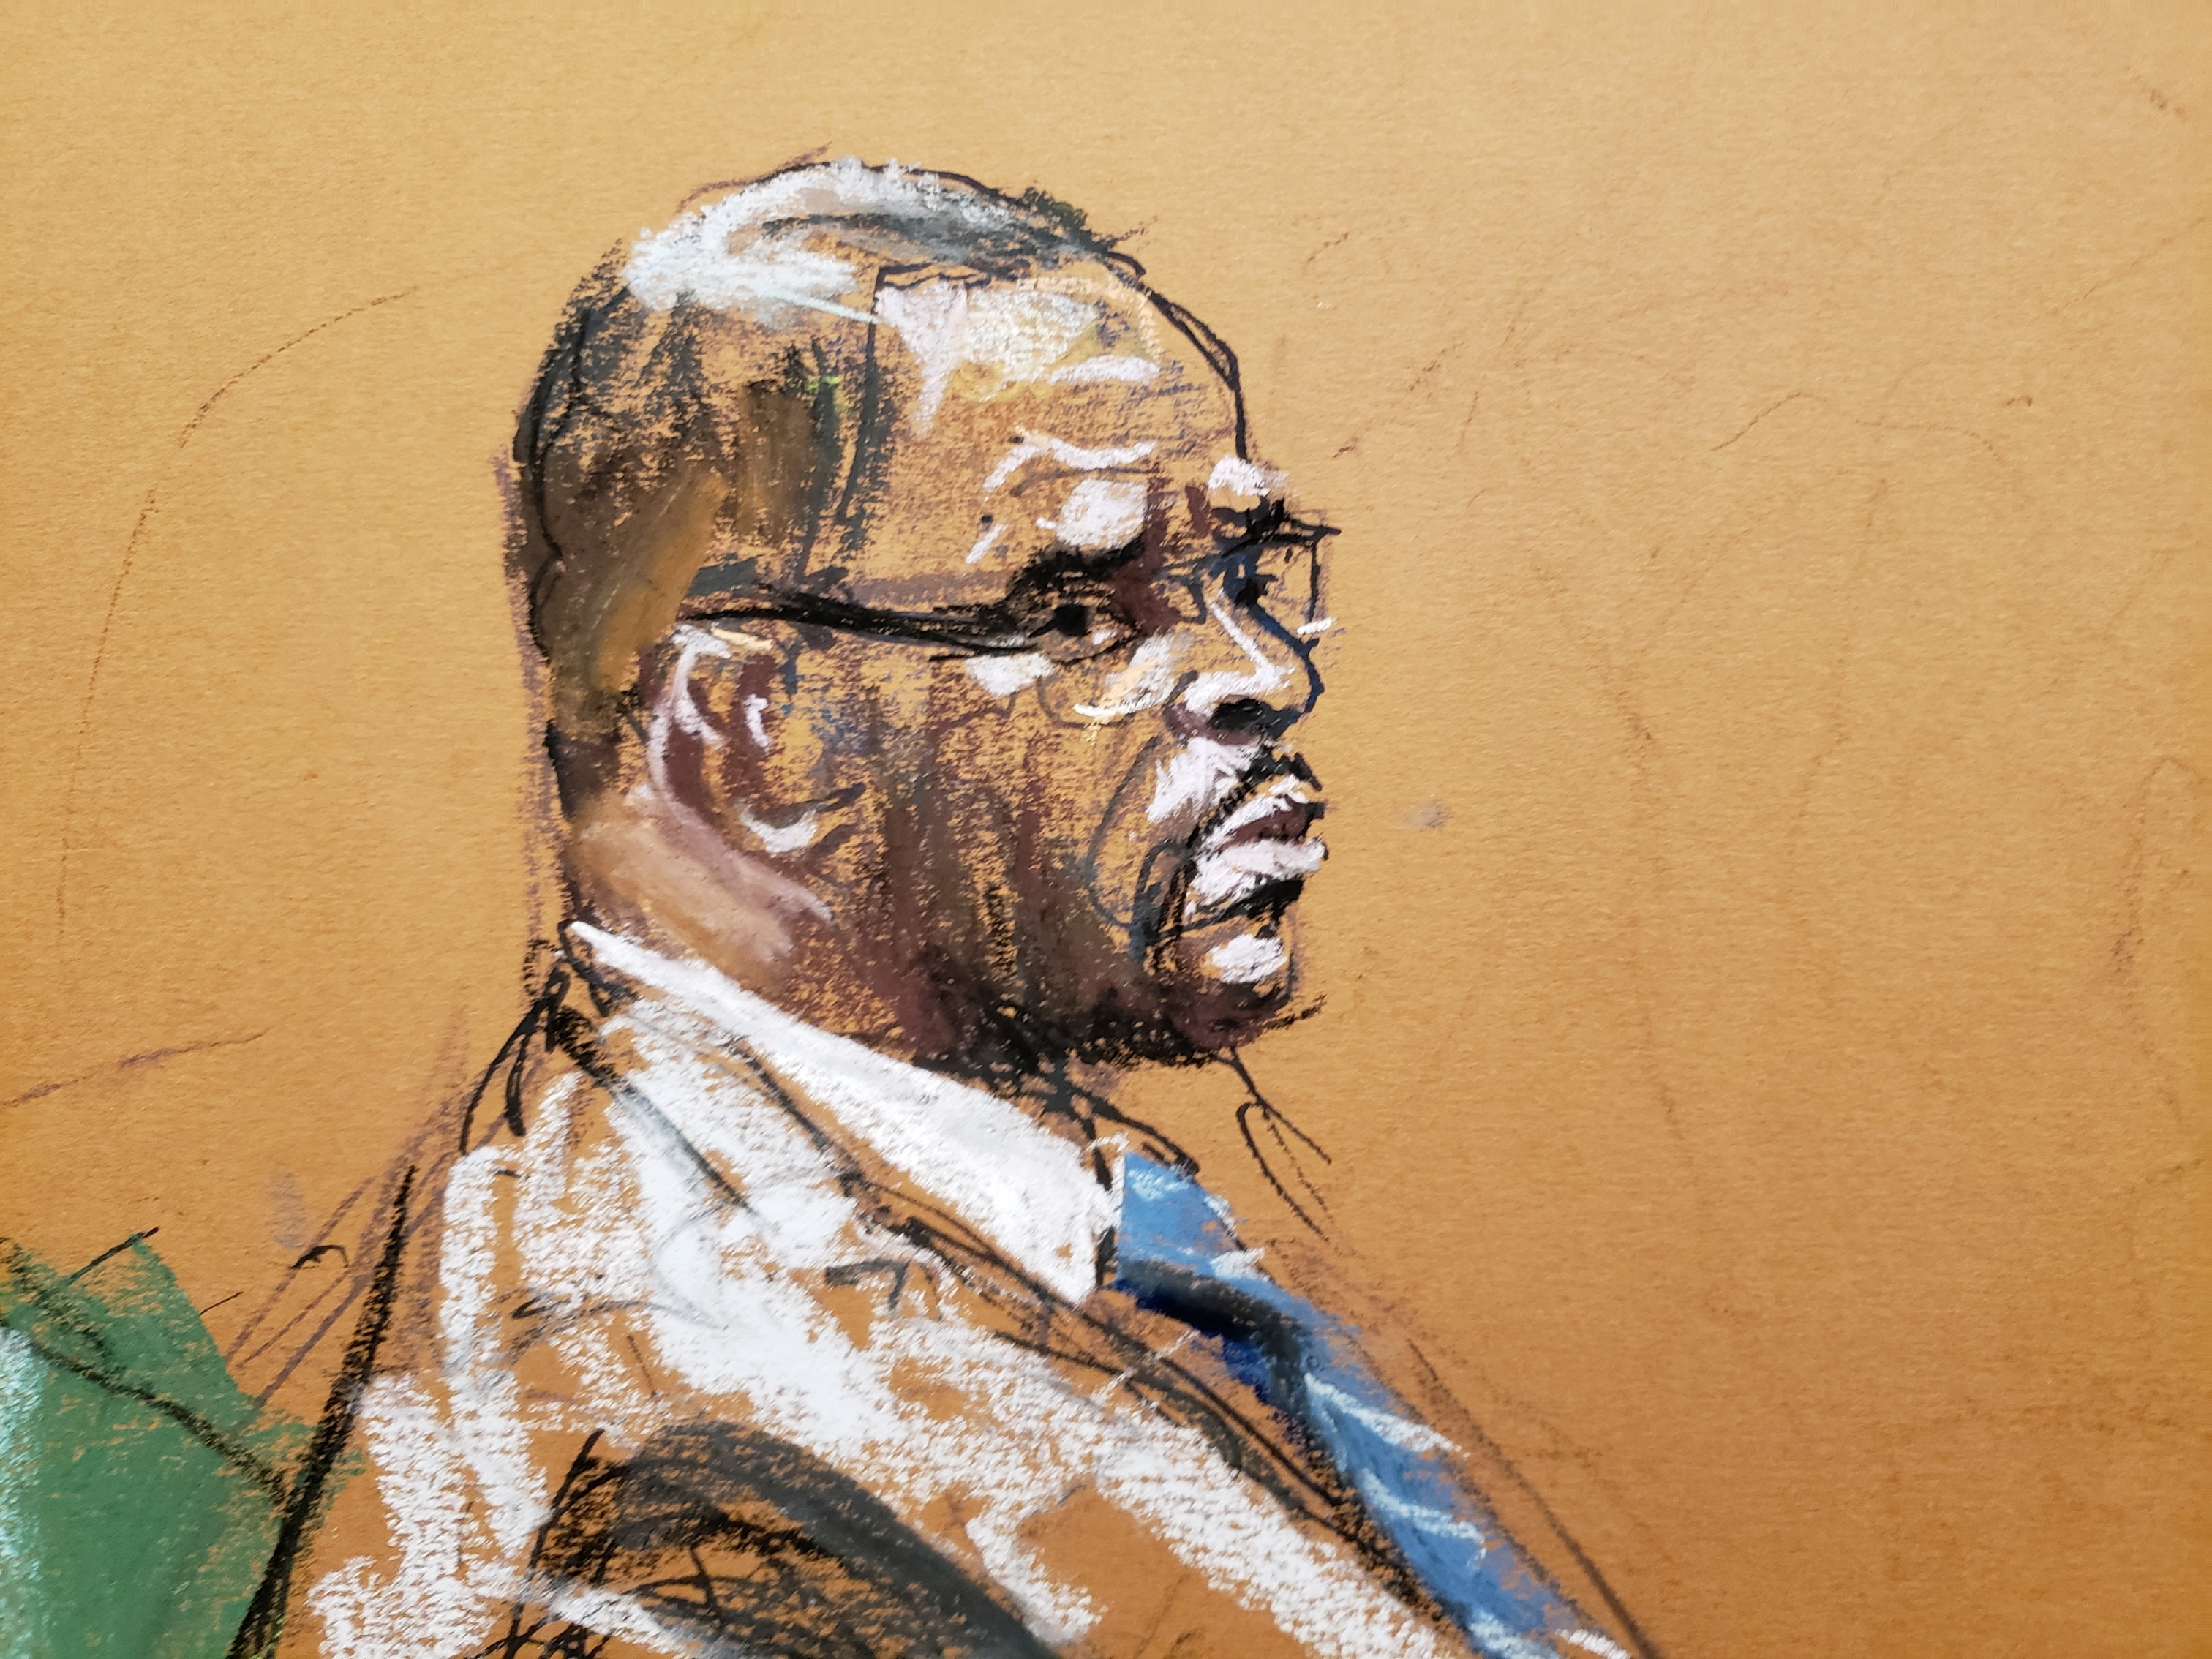 R Kelly attends Brooklyn's Federal District Court during the start of his trial in New York